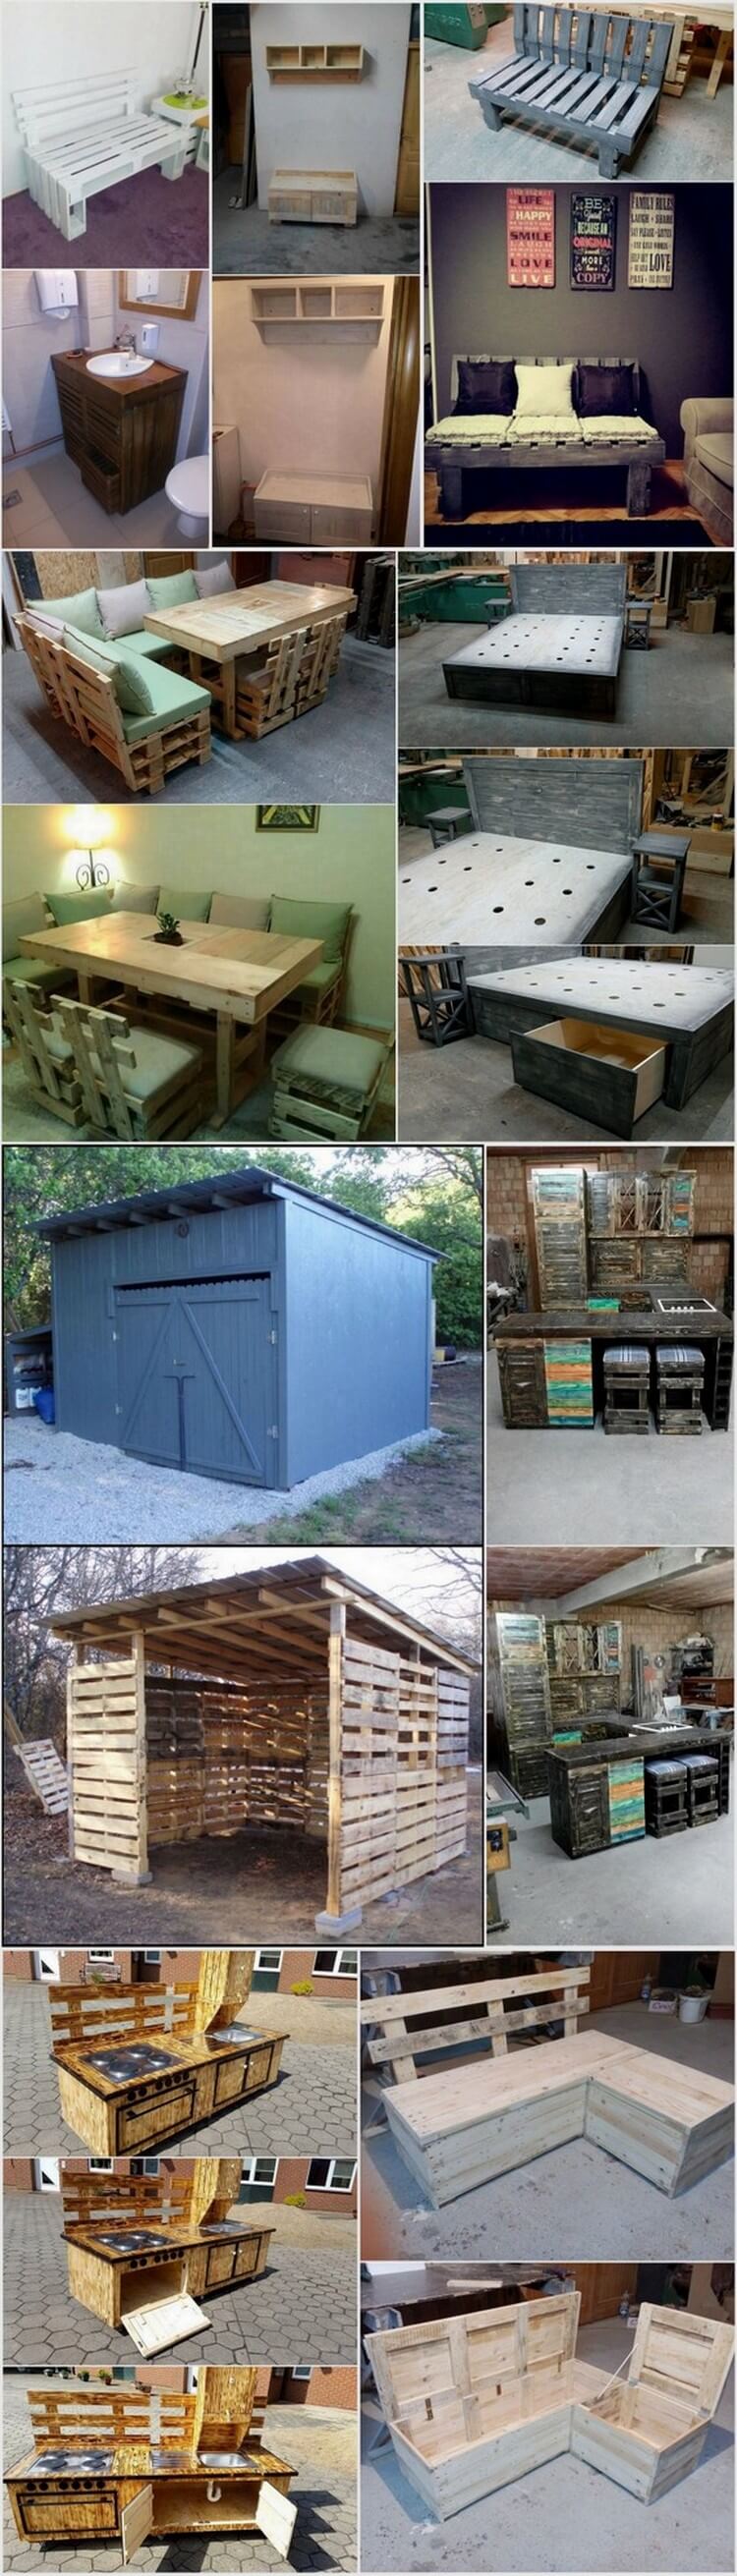 Pallet Wood Recycling Ideas